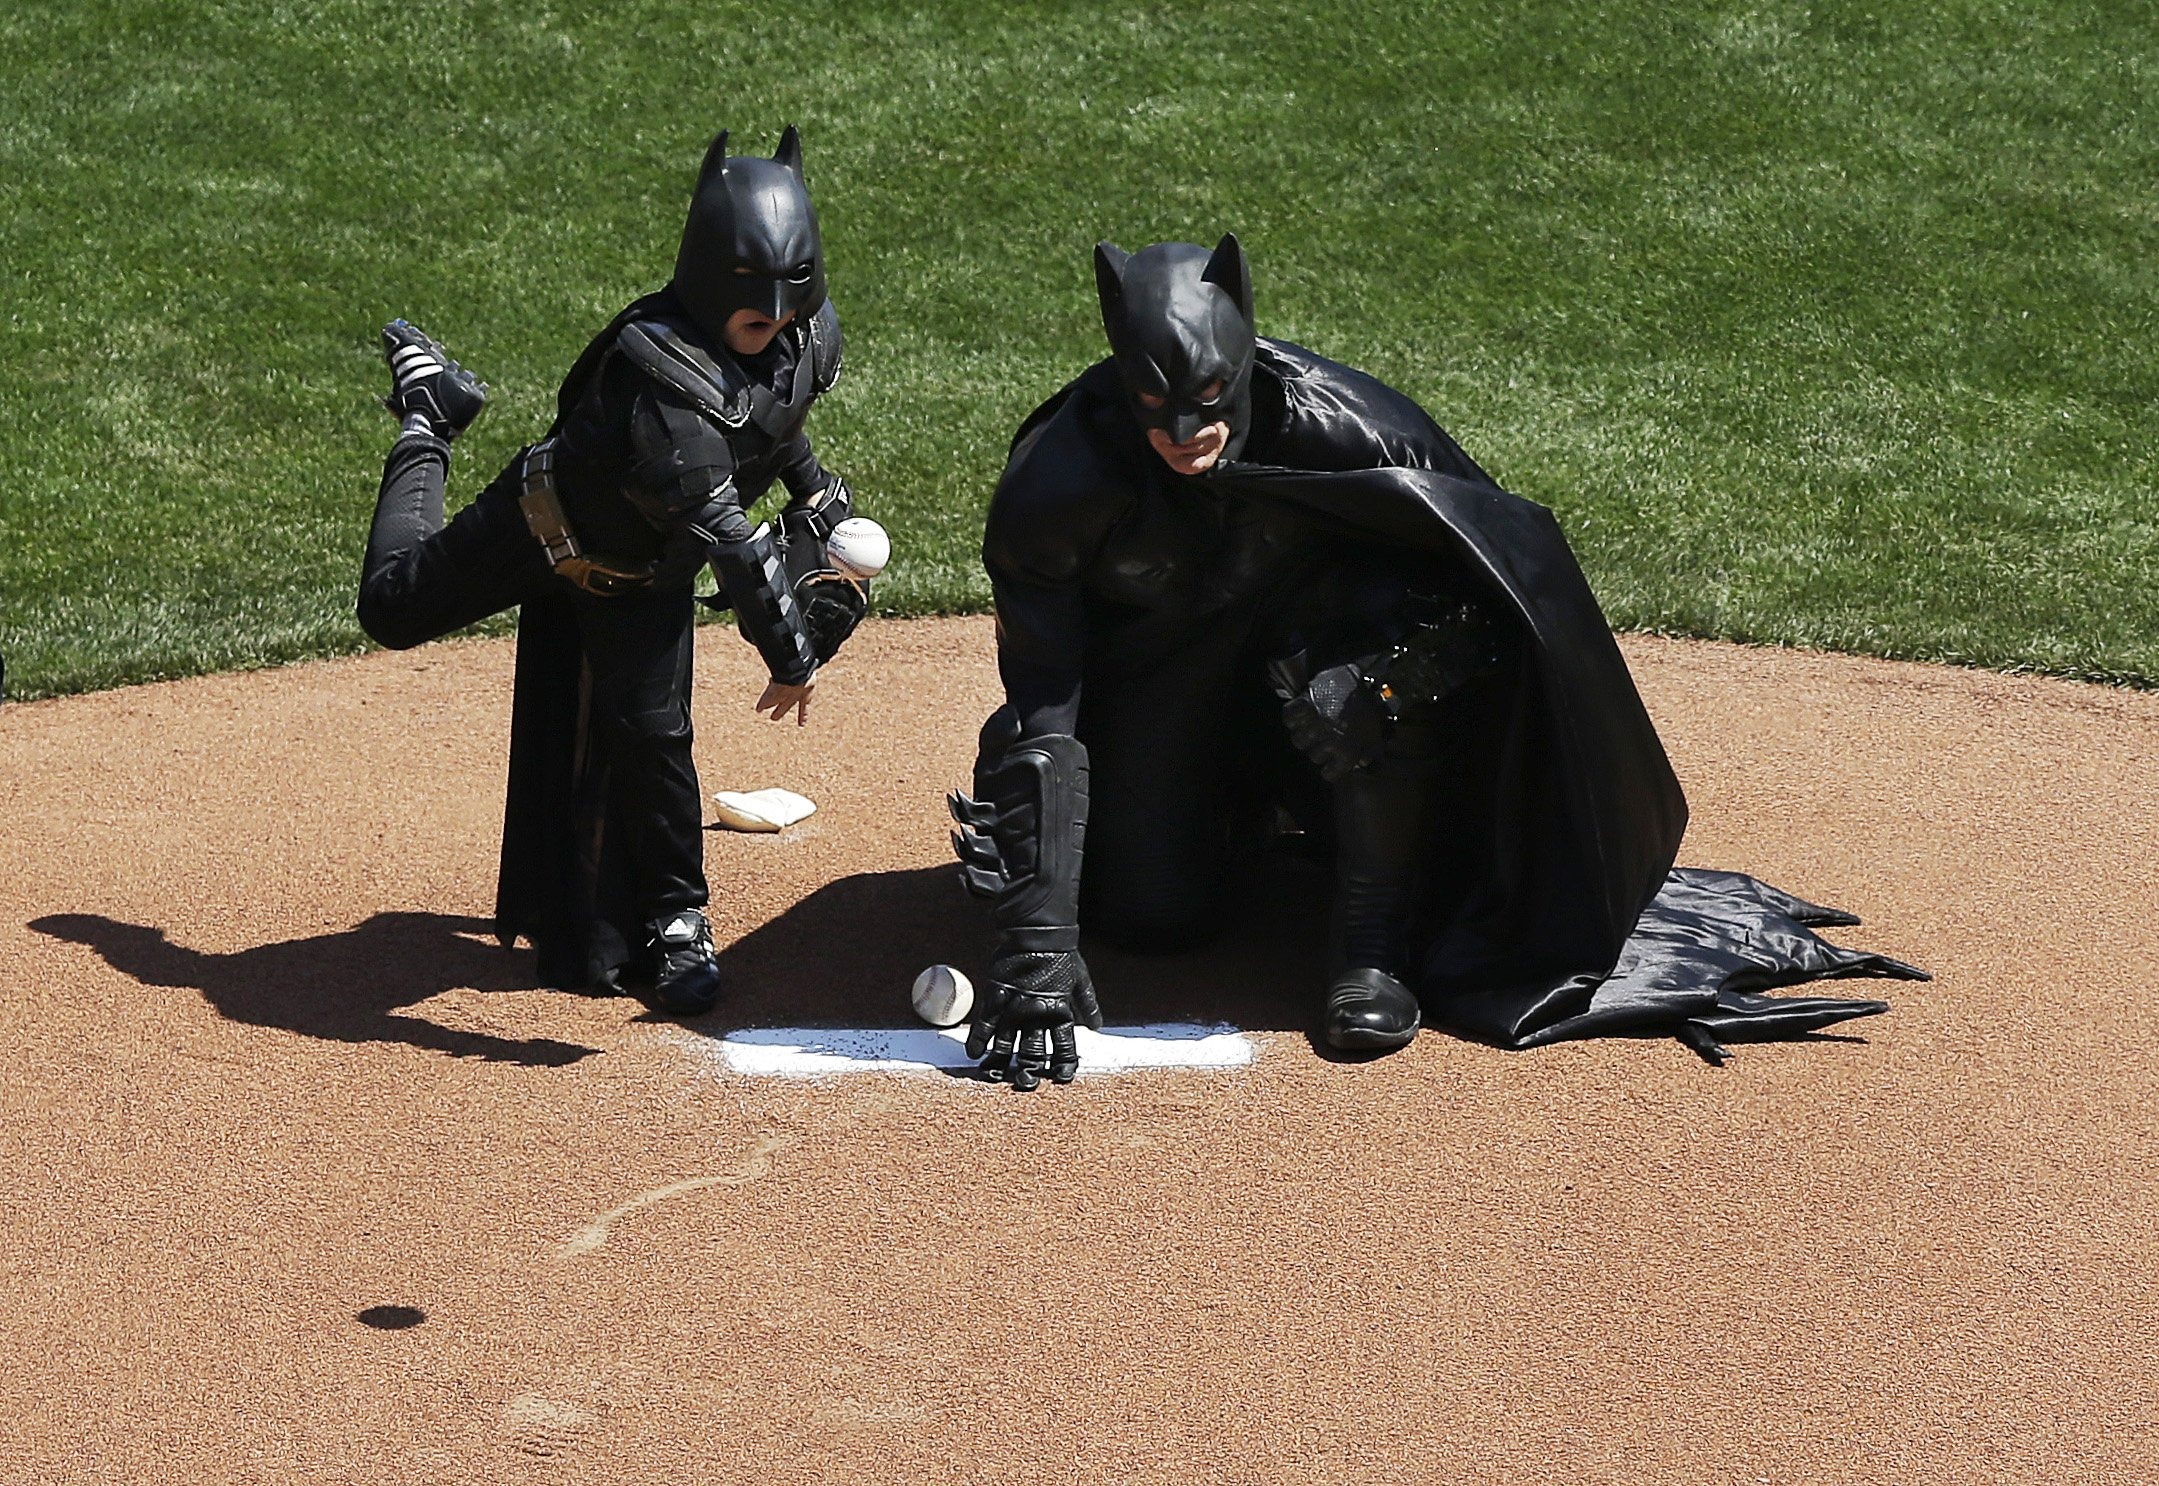 Batkid throws the opening pitch for the San Francisco Giants